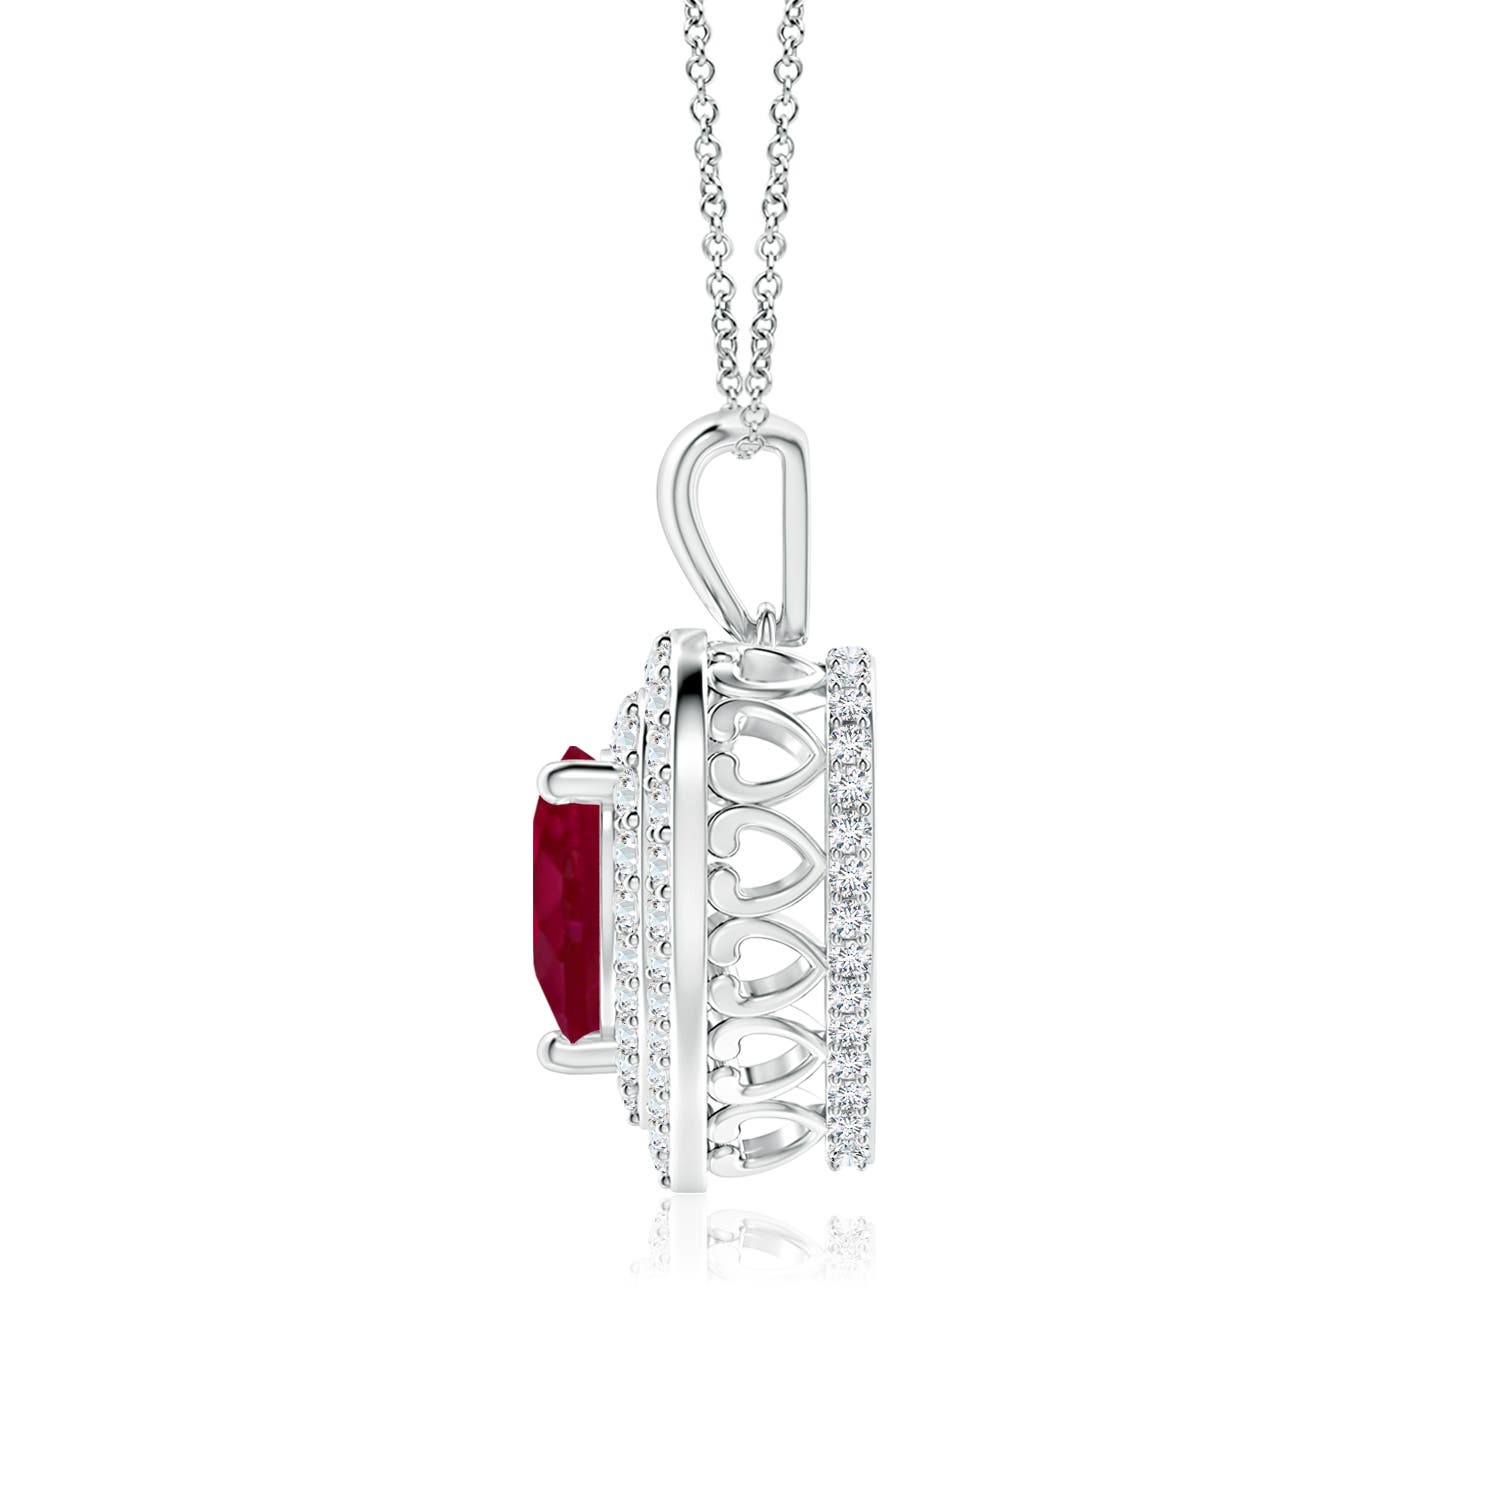 A - Ruby / 2.08 CT / 14 KT White Gold